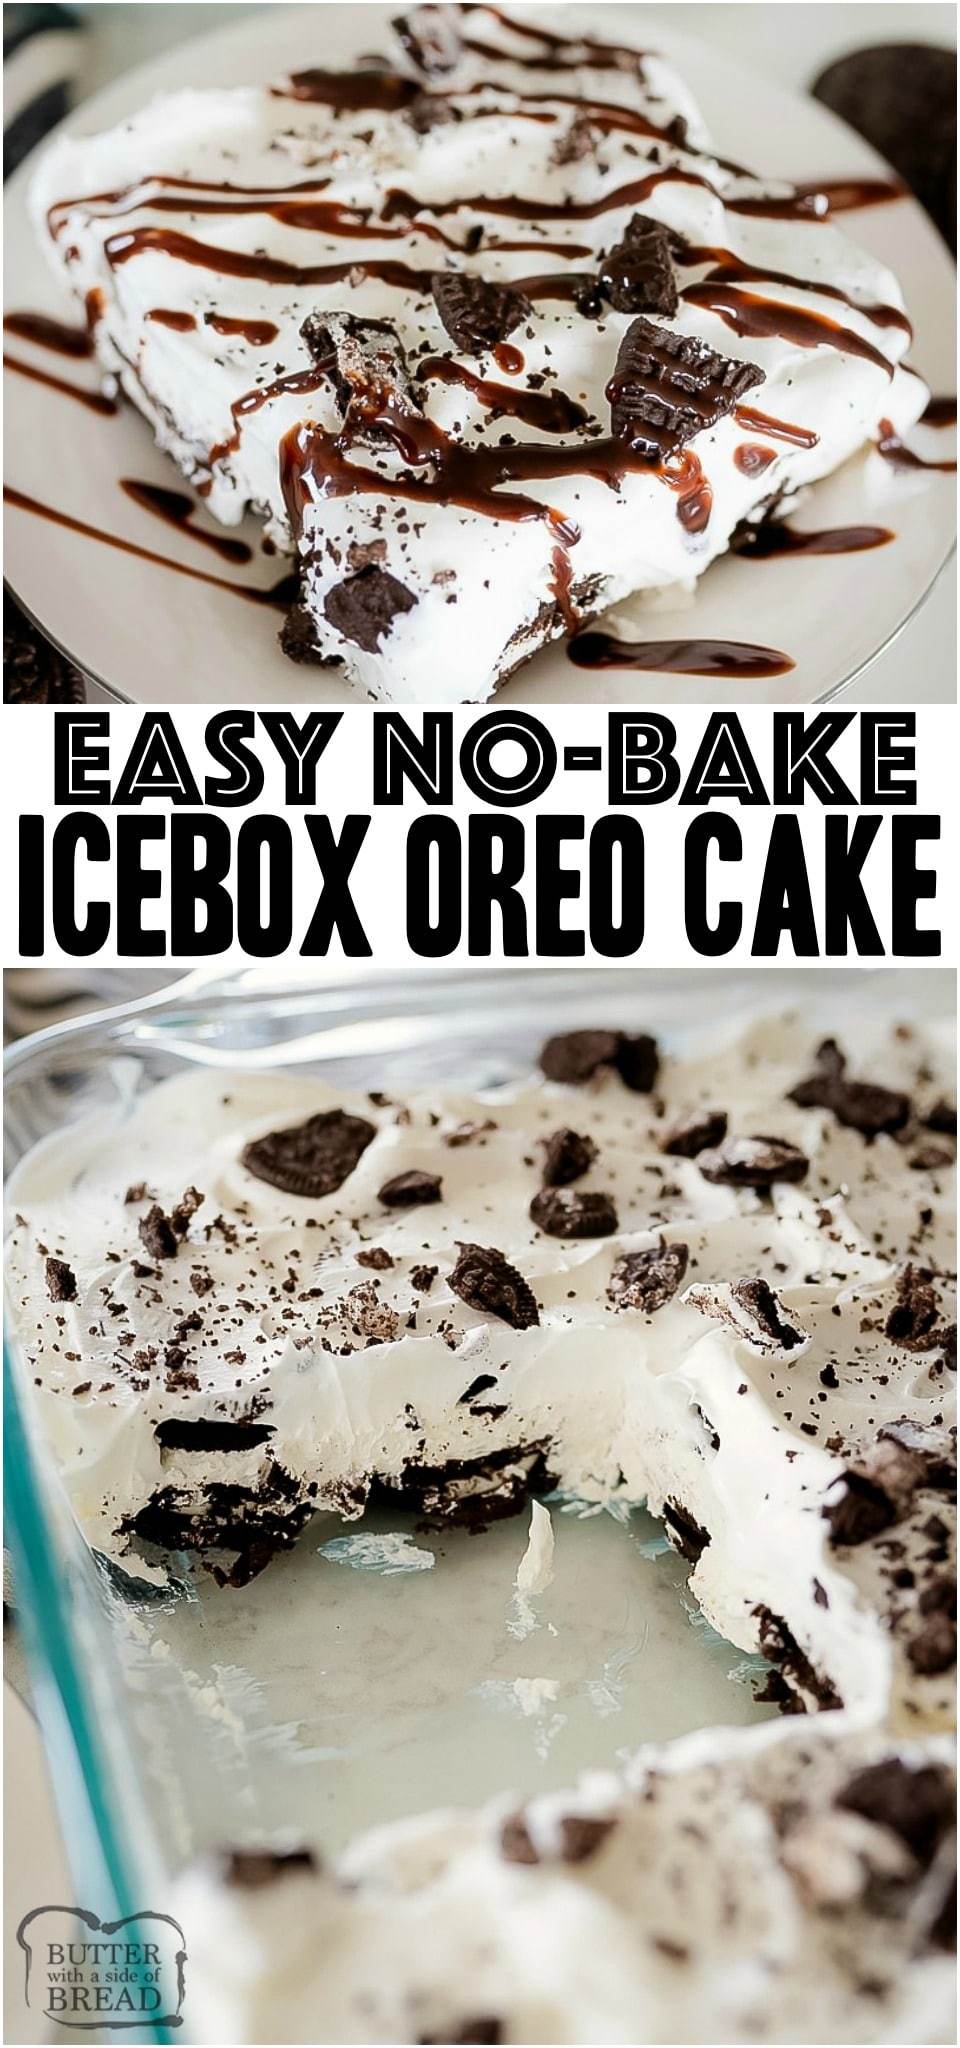 No Bake Oreo Cake is a rich & creamy layered dessert made with frozen whipped topping, cream cheese and Oreos. This is the perfect summer dessert for cookies & cream lovers! #icebox #cake #nobake #OREO #cookiesandcream #summer #dessert #easyrecipe from BUTTER WITH A SIDE OF BREAD